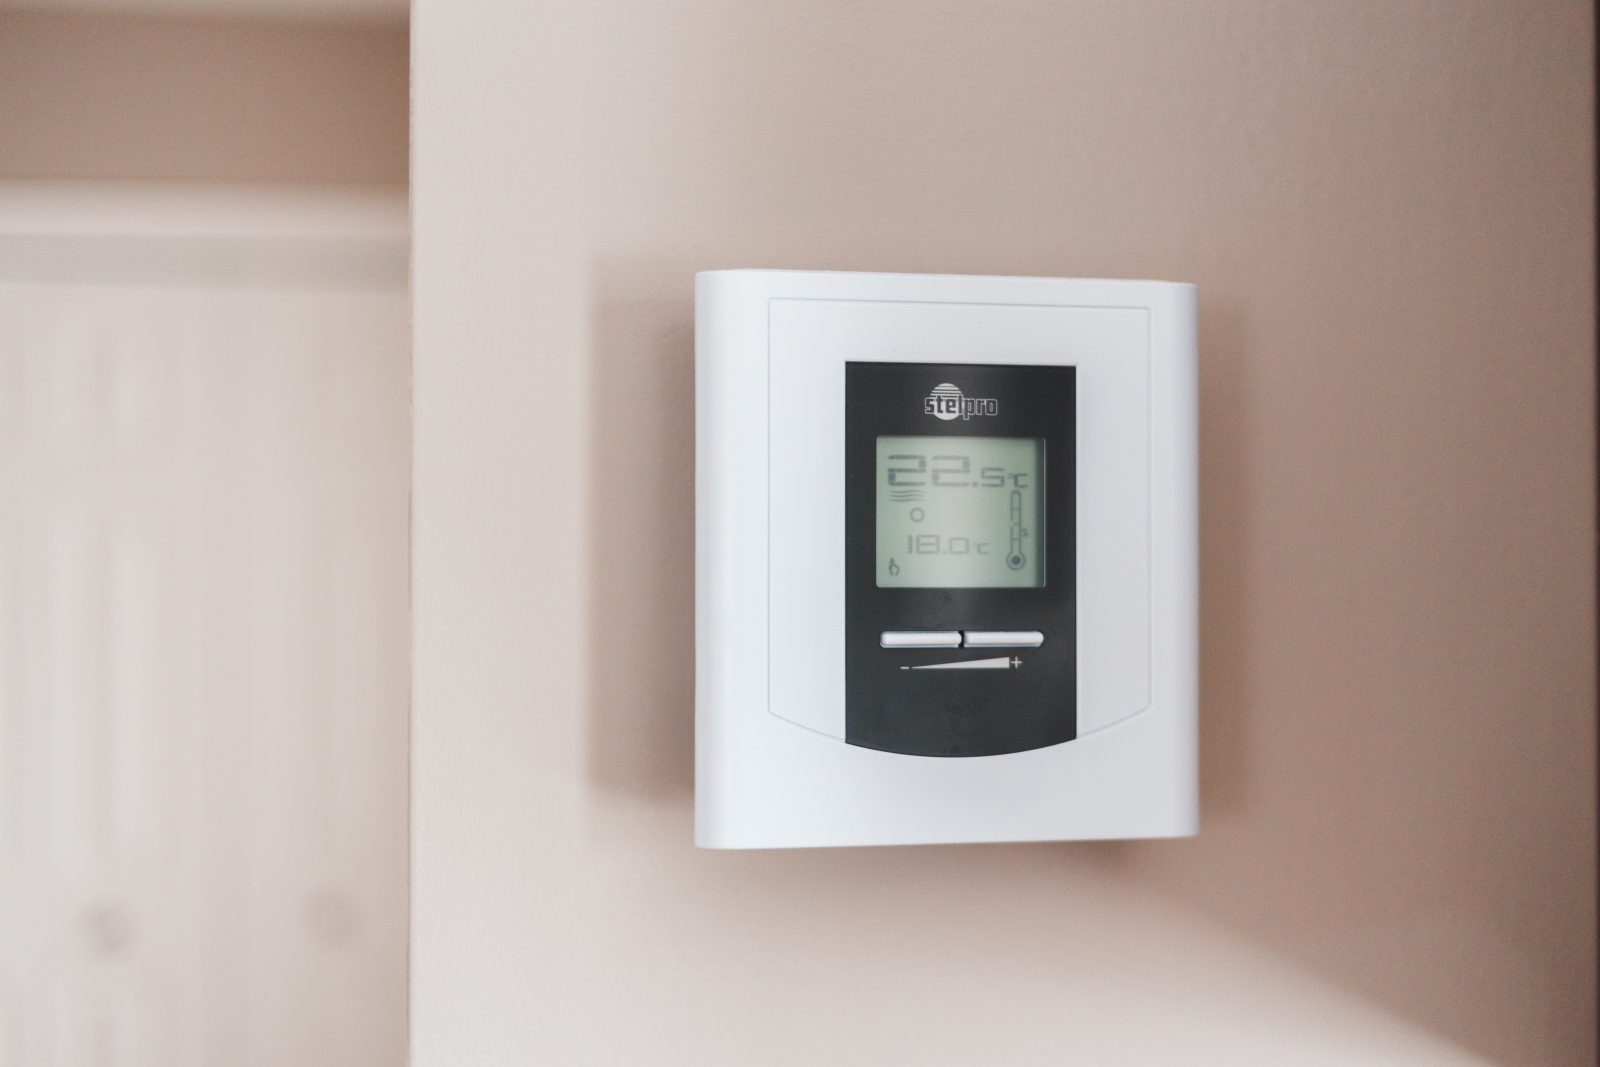 A thermostat on the walls. 